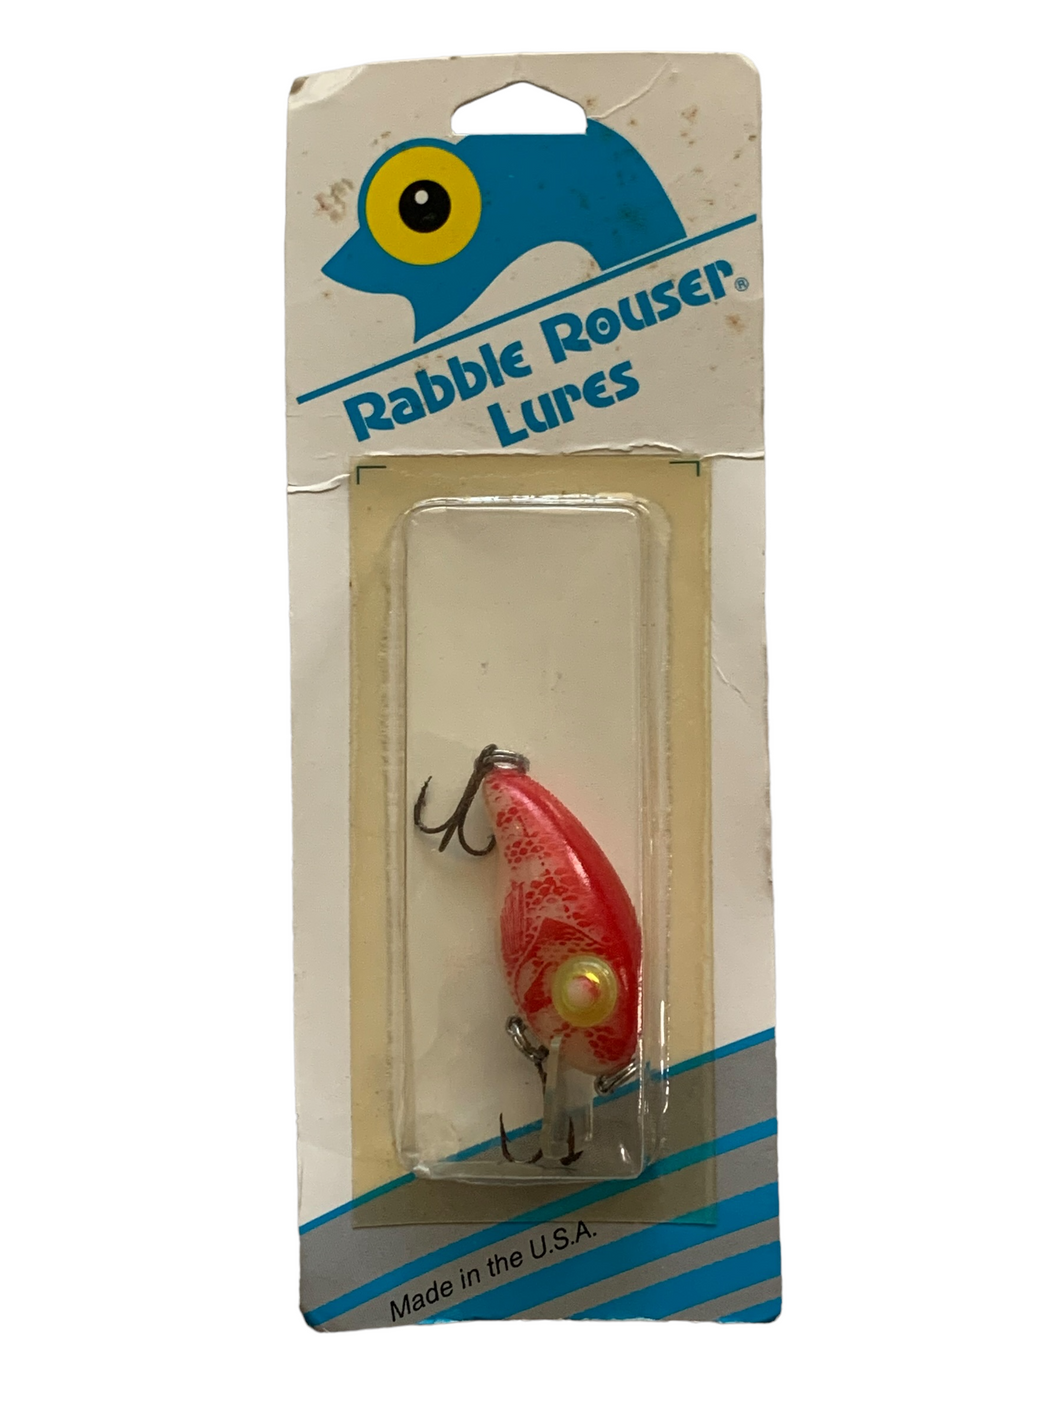 RABBLE ROUSER LURES BABY ASHLEY Fishing Lure • RED SCALE or PINK NATURAL